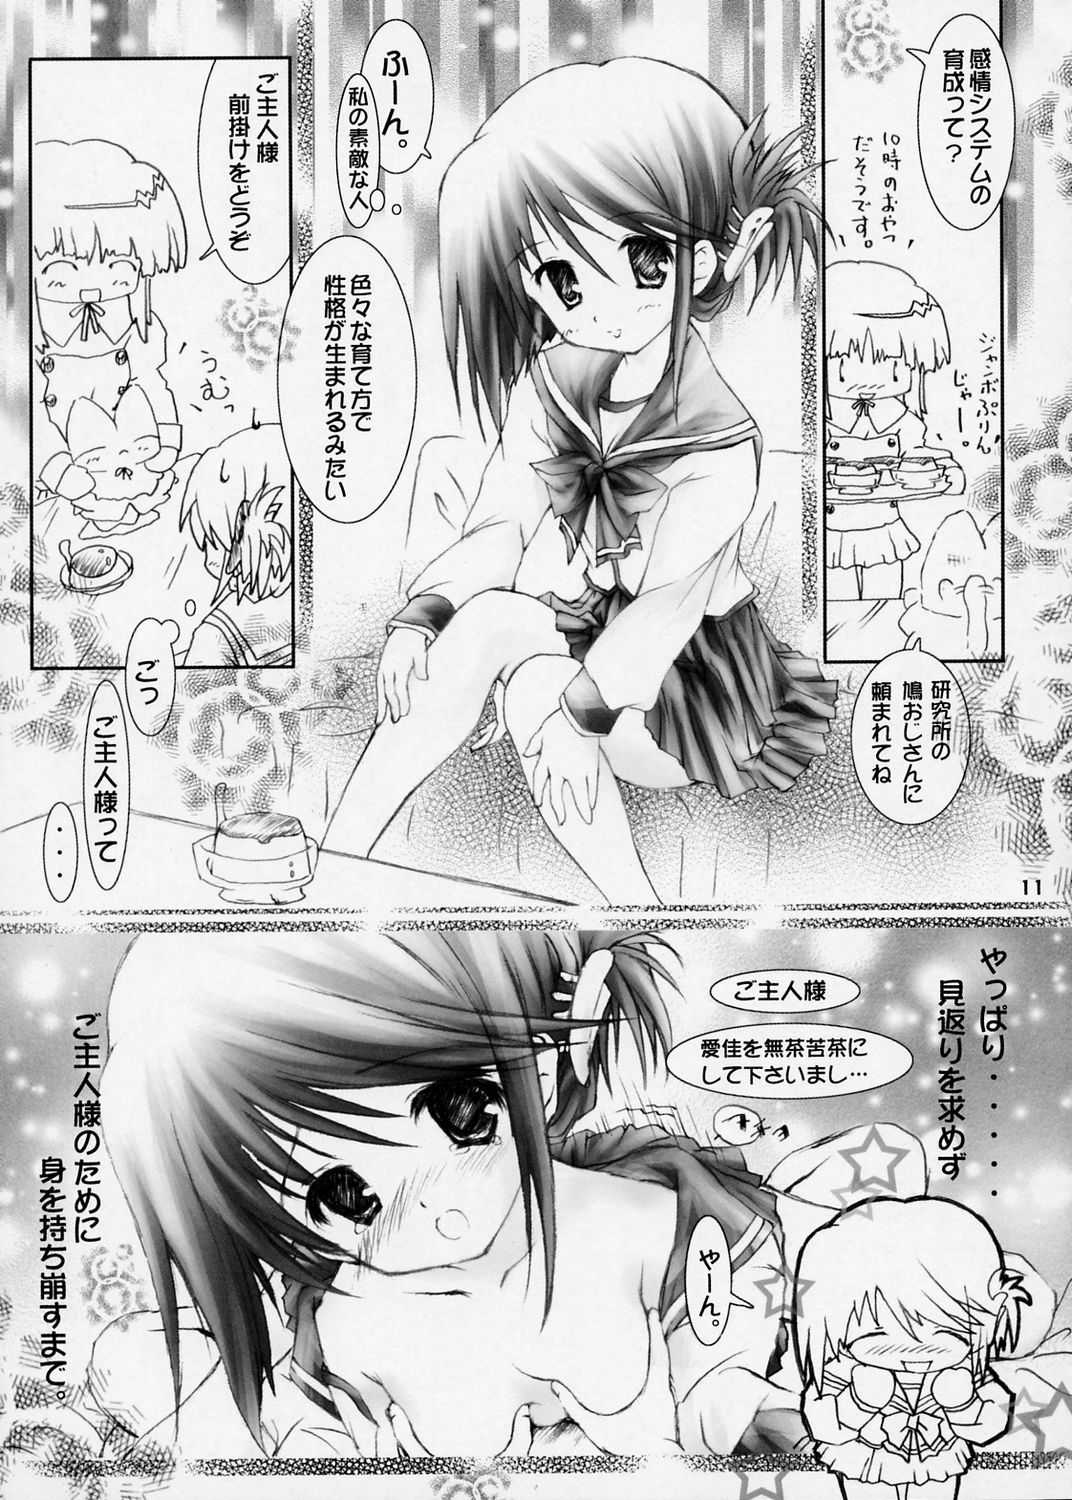 (Comic Market Special 4) [Altyna] Cherry Blossom (To Heart 2) (コミケットスペシャル4) [Altyna (葵流奈)] Cherry Blossom (トゥハート2)